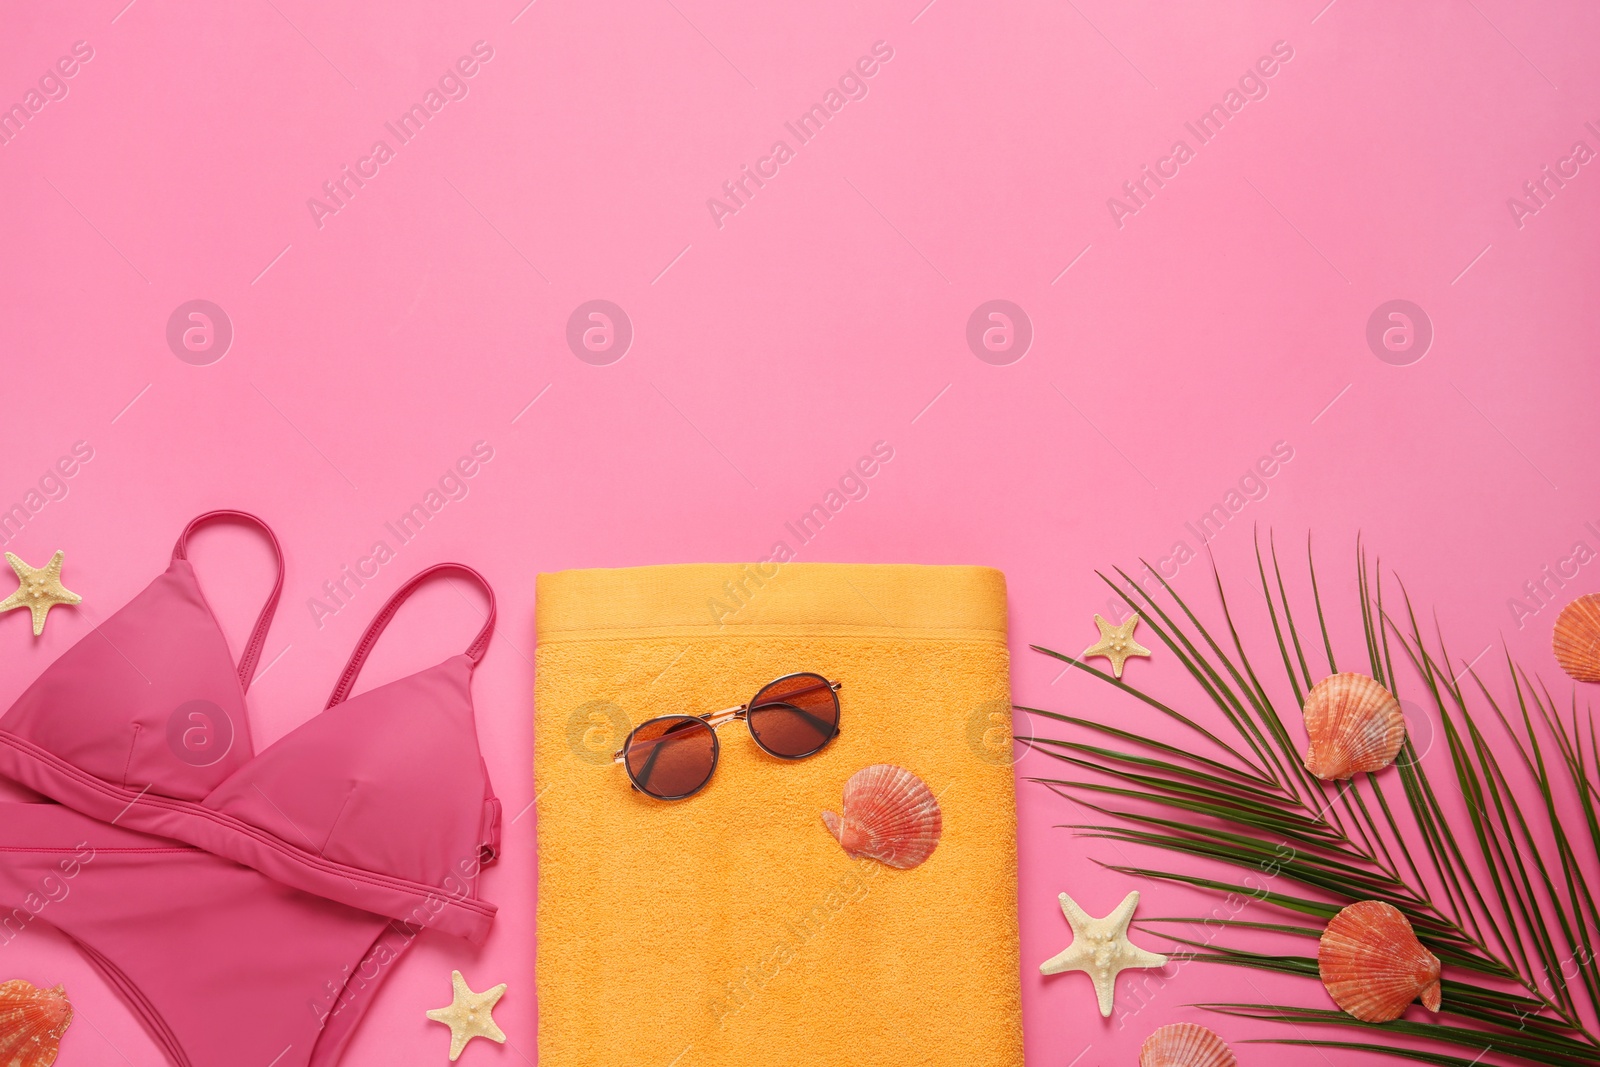 Photo of Flat lay composition with different beach objects on pink background, space for text